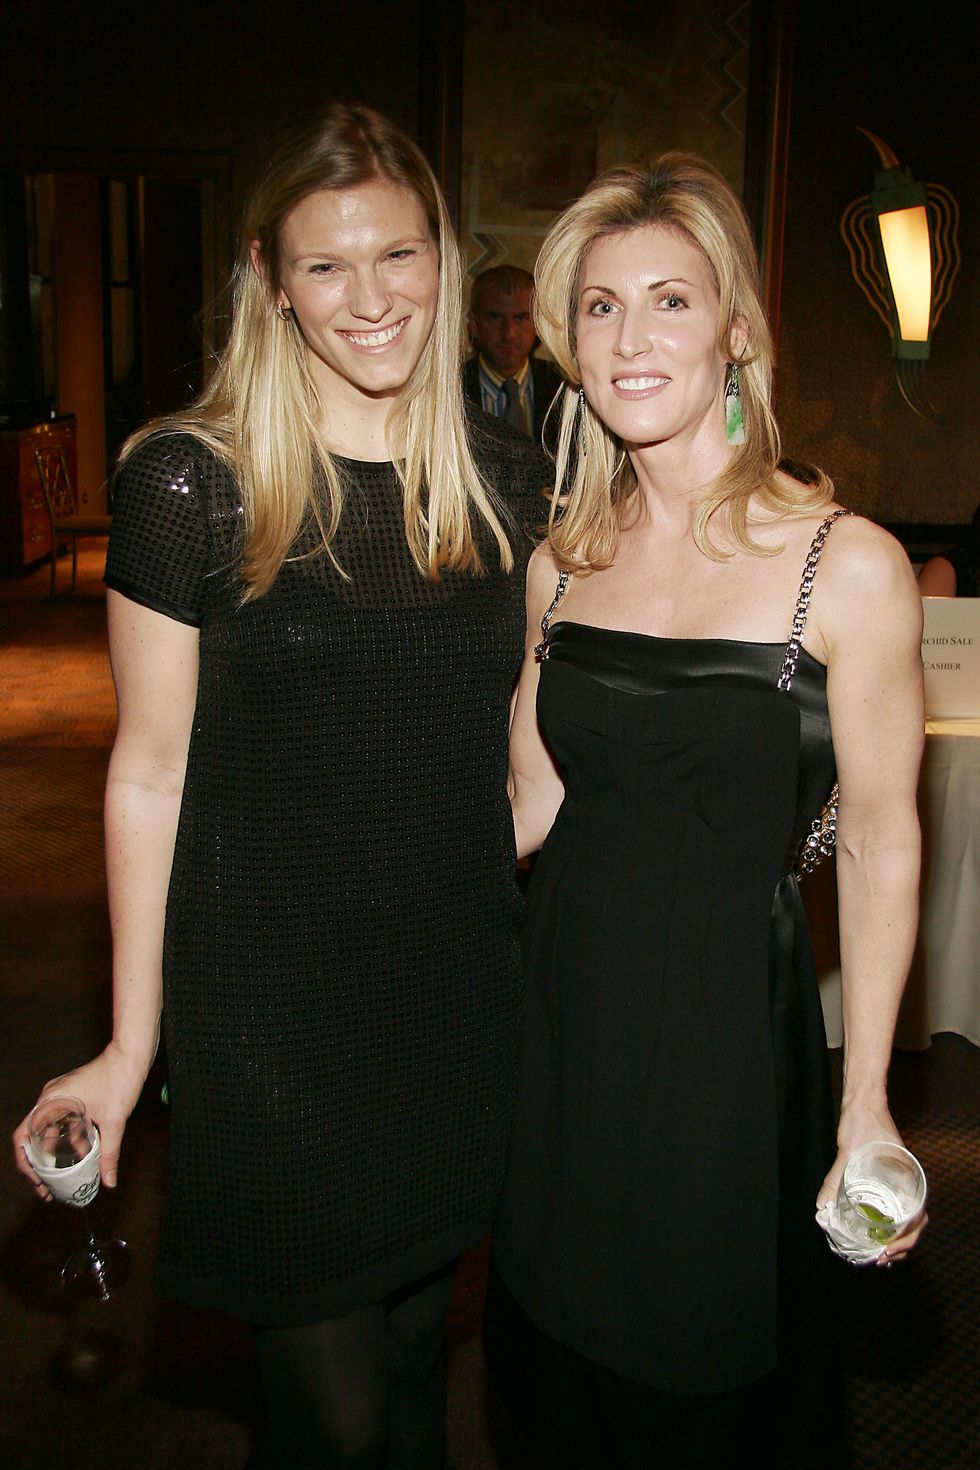 NEW YORK CITY, NY - FEBRUARY 7: Lindsay Shookus and Diane Tierney attend The New York Botanical Garden Orchid Dinner at Rainbow Room on February 7, 2008 in New York City. (Photo by JASON AUGUSTINE/Patrick McMullan via Getty Images)